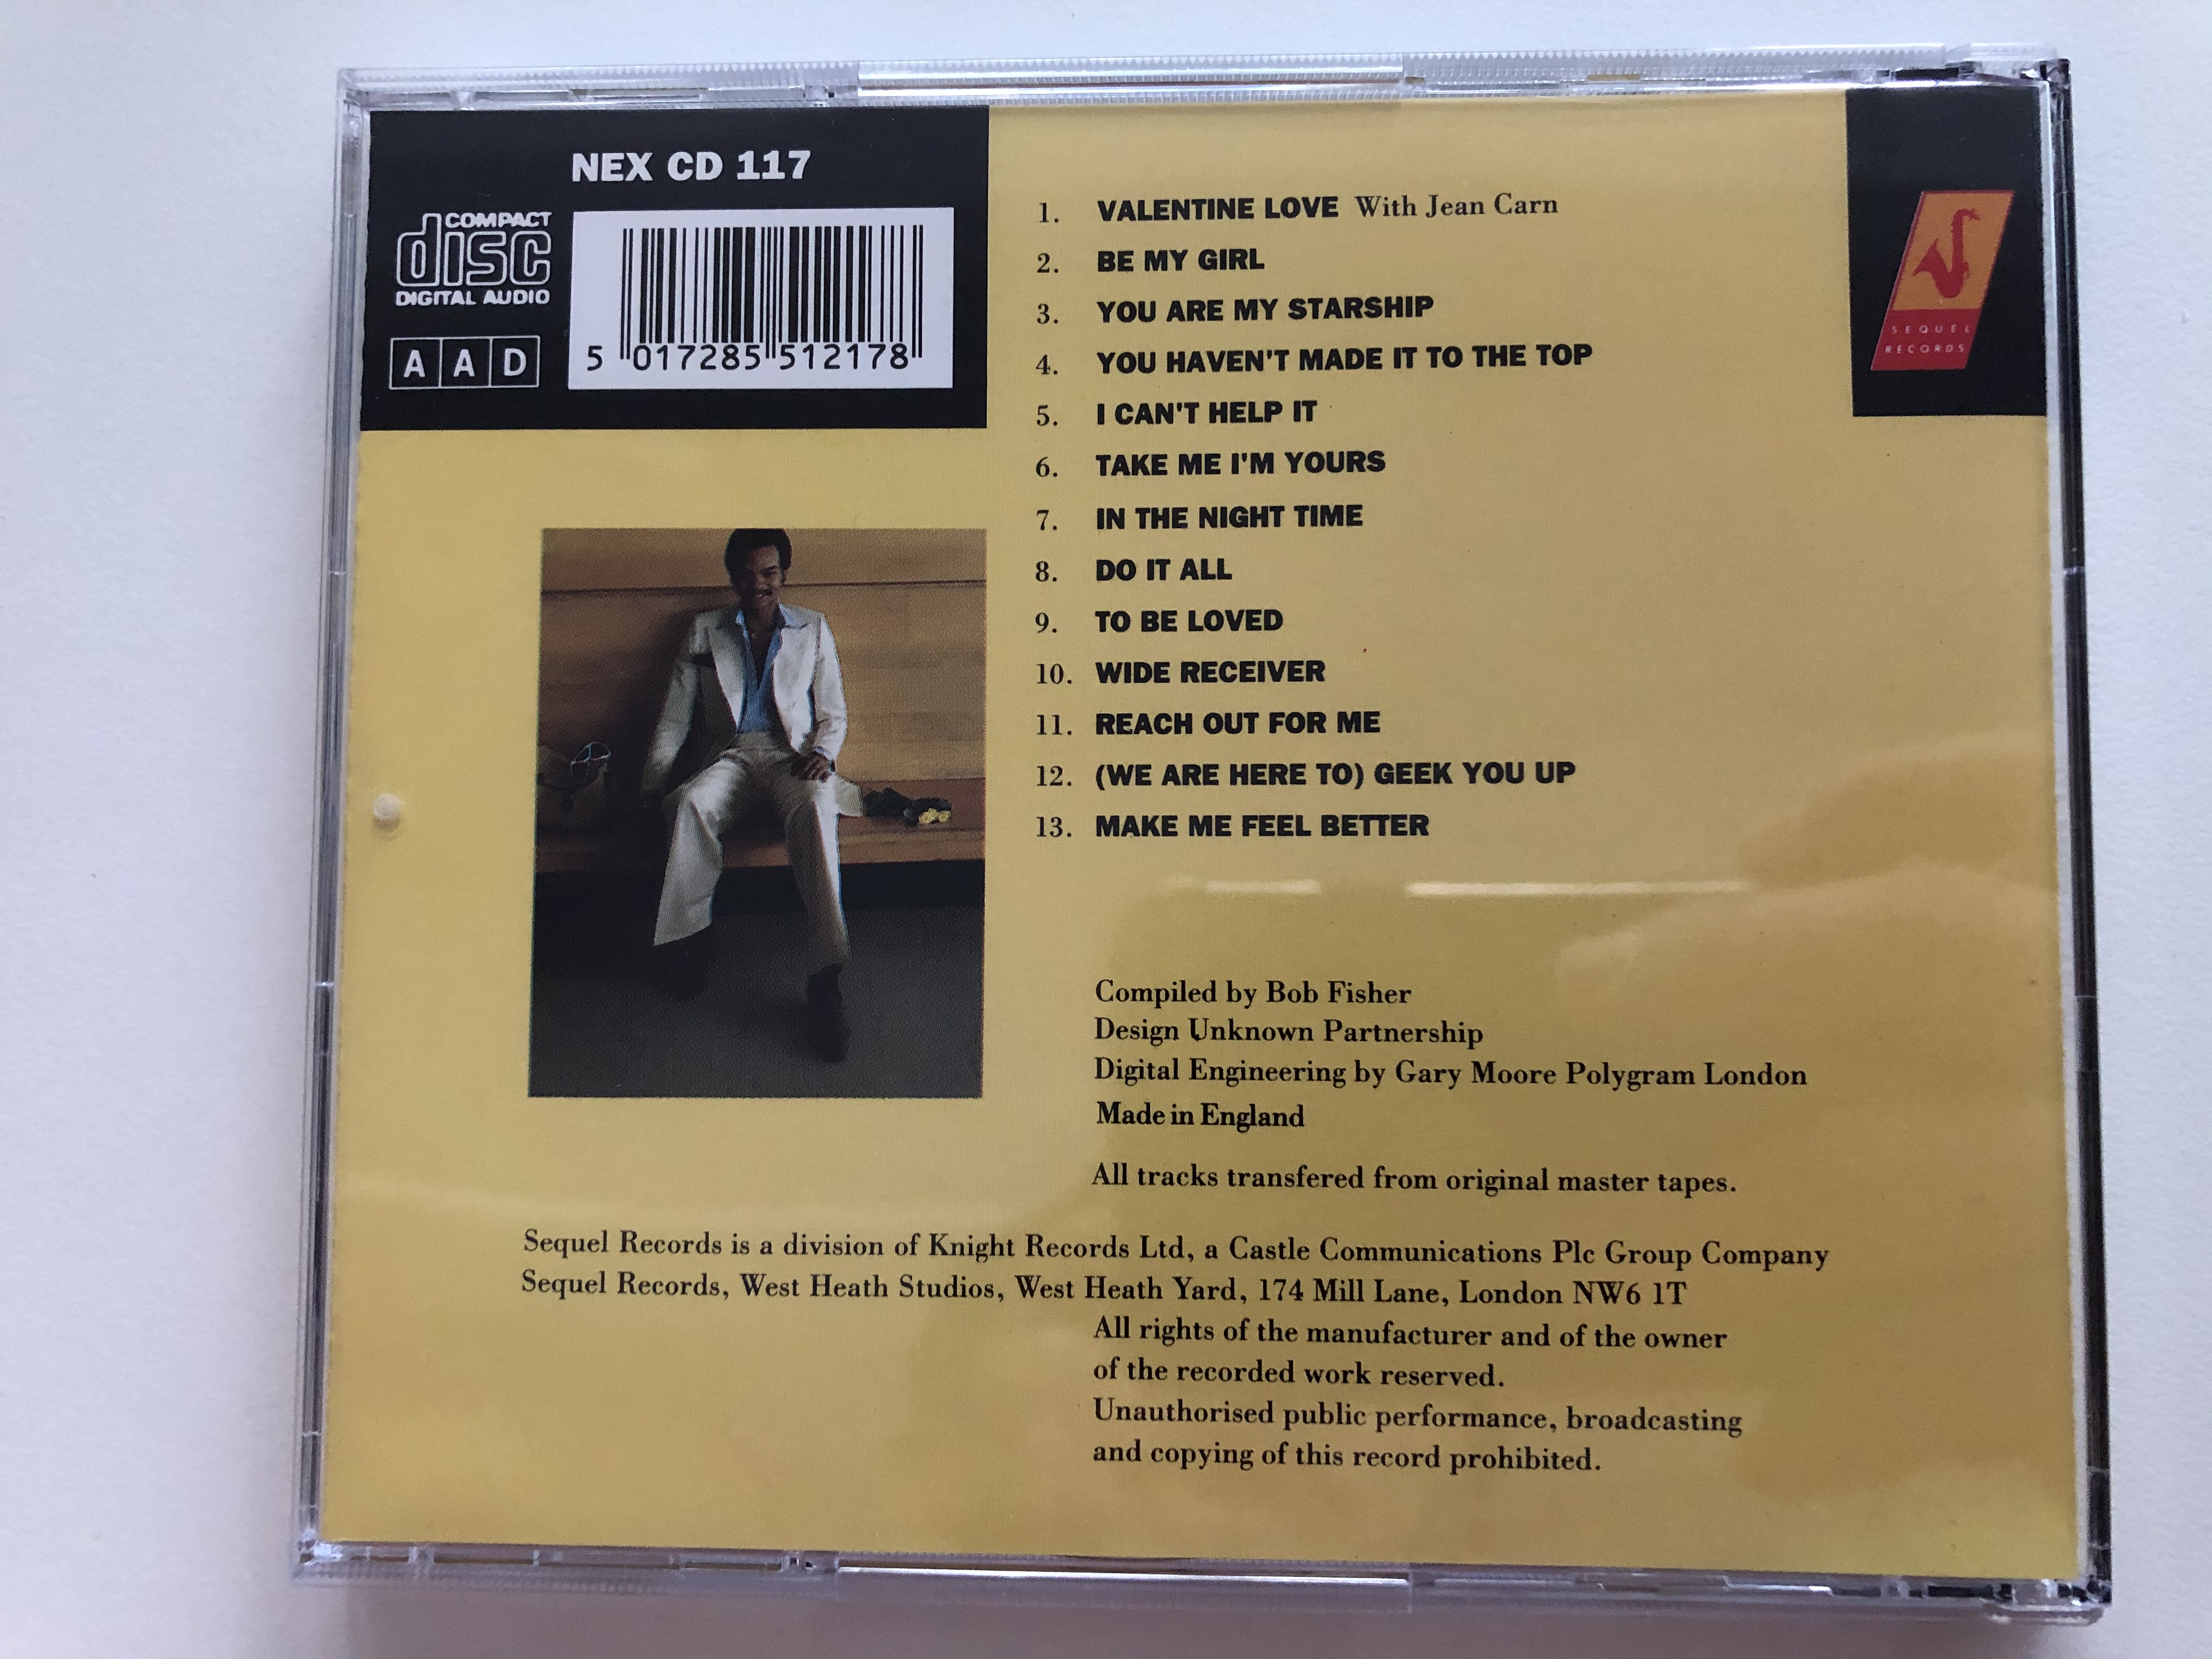 the-best-of-michael-henderson-featuring-jean-carn-phyllis-hyman-the-buddah-collection-sequel-records-audio-cd-1990-nex-cd-117-4-.jpg